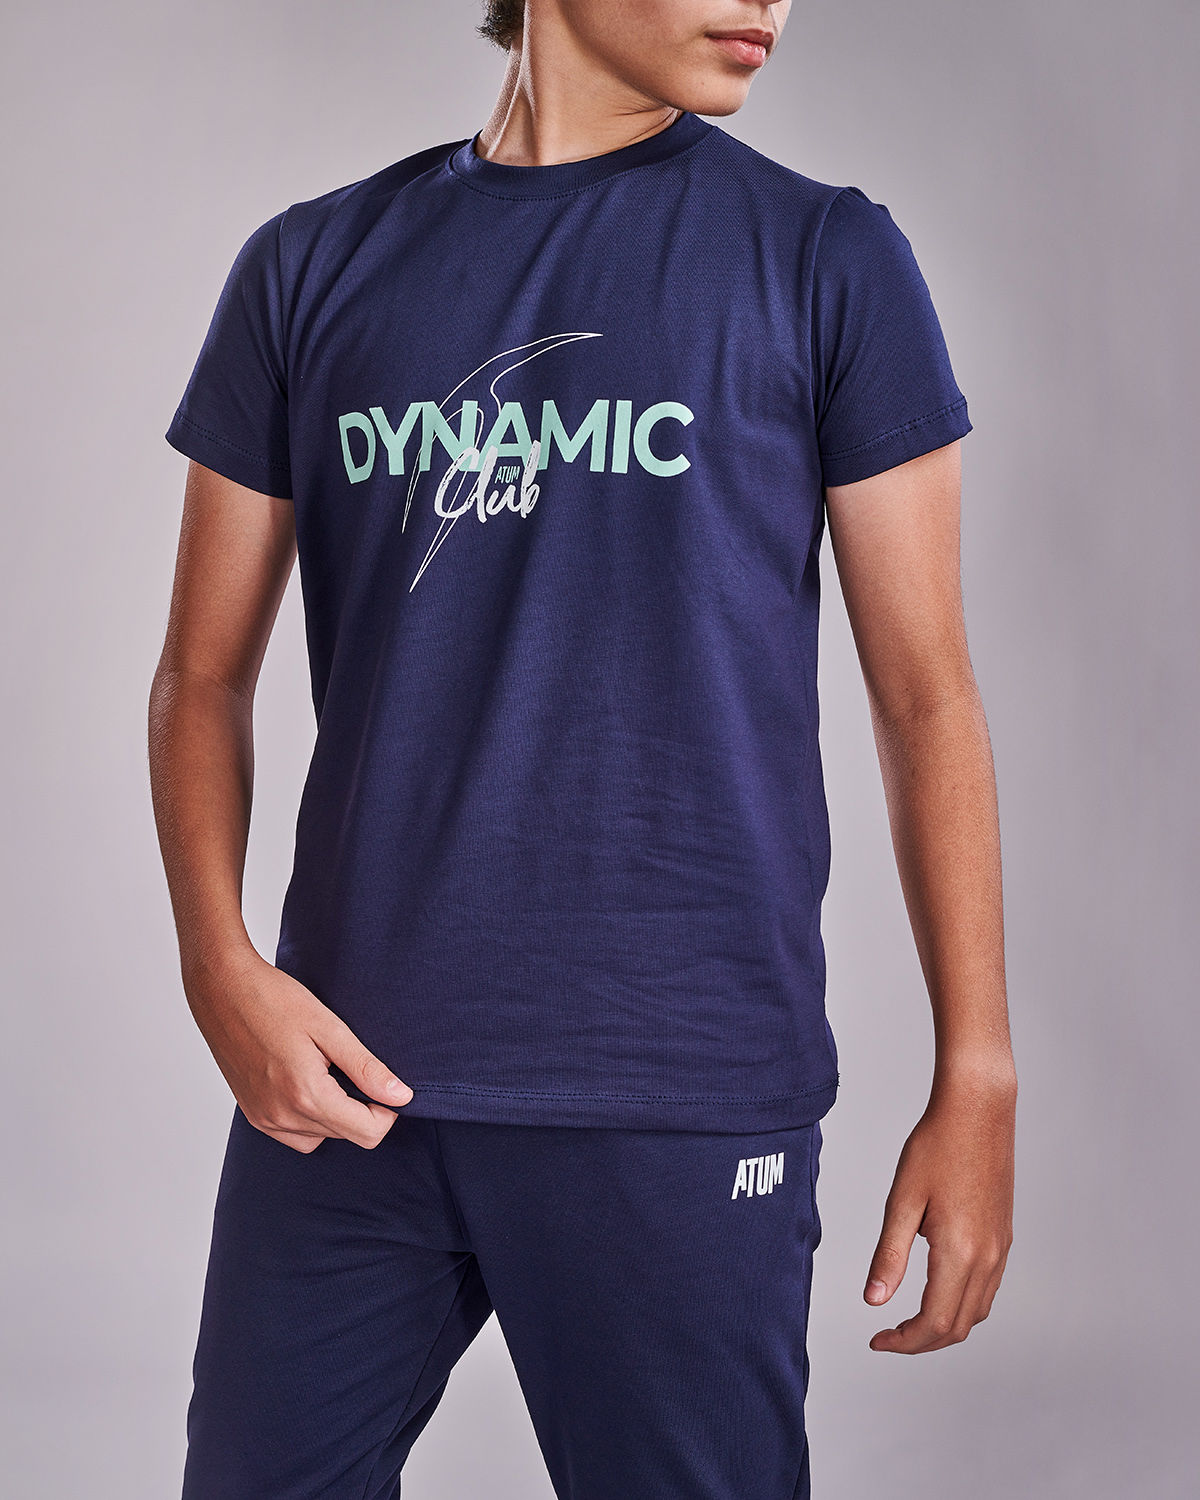 Photo by 𝗔𝗧𝗨𝗠 SPORTSWEAR ® on May 22, 2022. May be an image of 1 boy wears a navy t-shirt with a text ''Dynamic club".